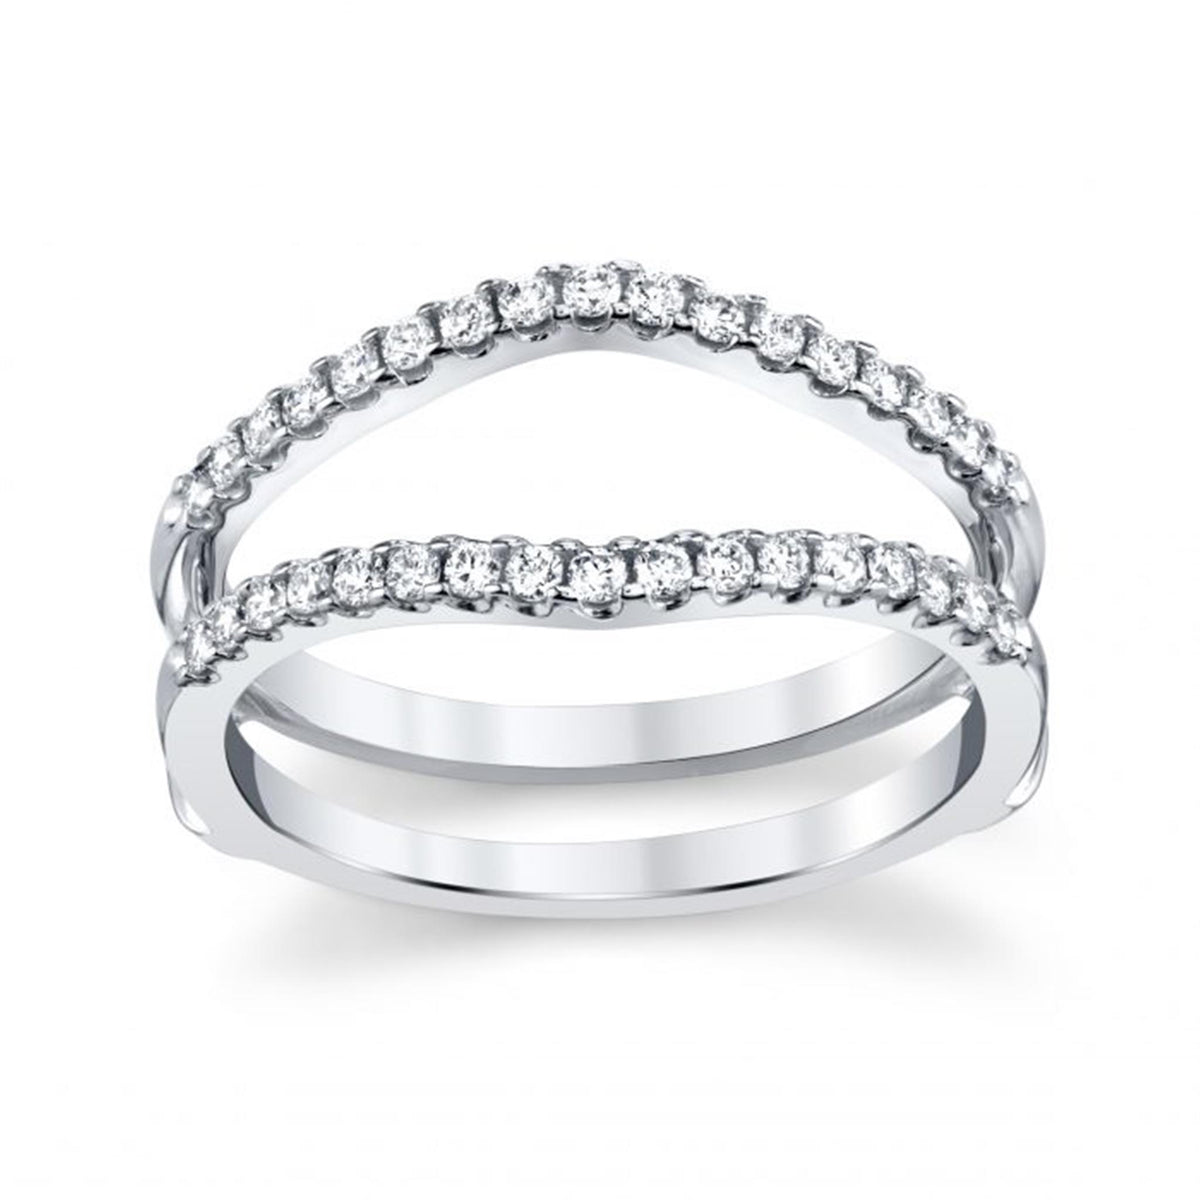 14Kt White Gold Insert/Guard with 0.33cttw Natural Diamonds